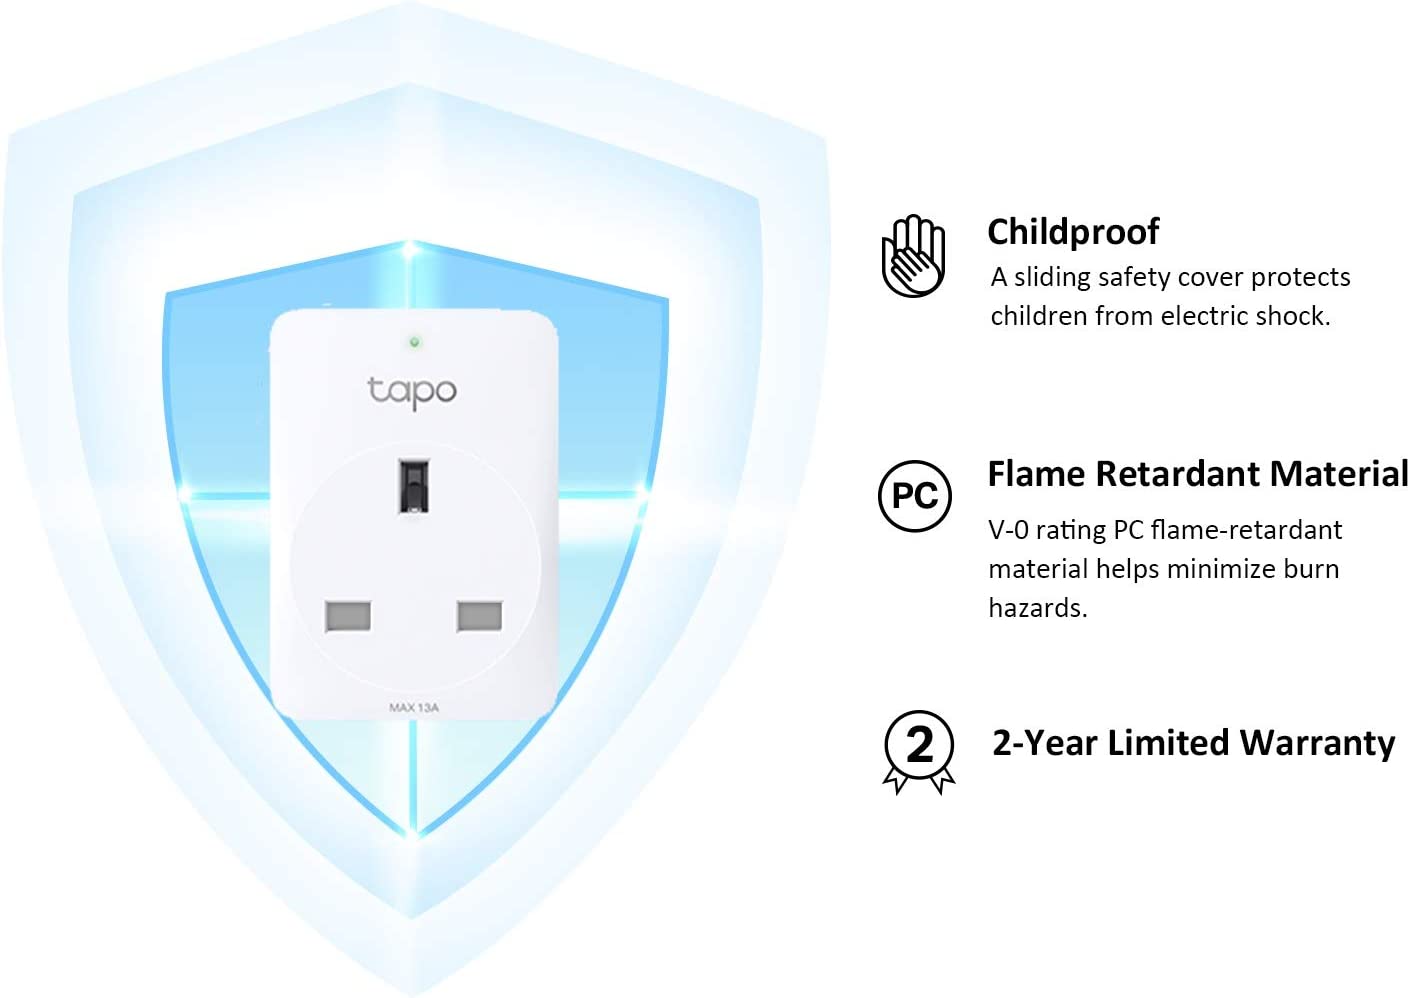 TP-Link Tapo Smart Plug Mini, Smart Home Wifi Outlet Works with Alexa Echo  & Google Home, No Hub Required, New Tapo APP Needed P100 2-pack 